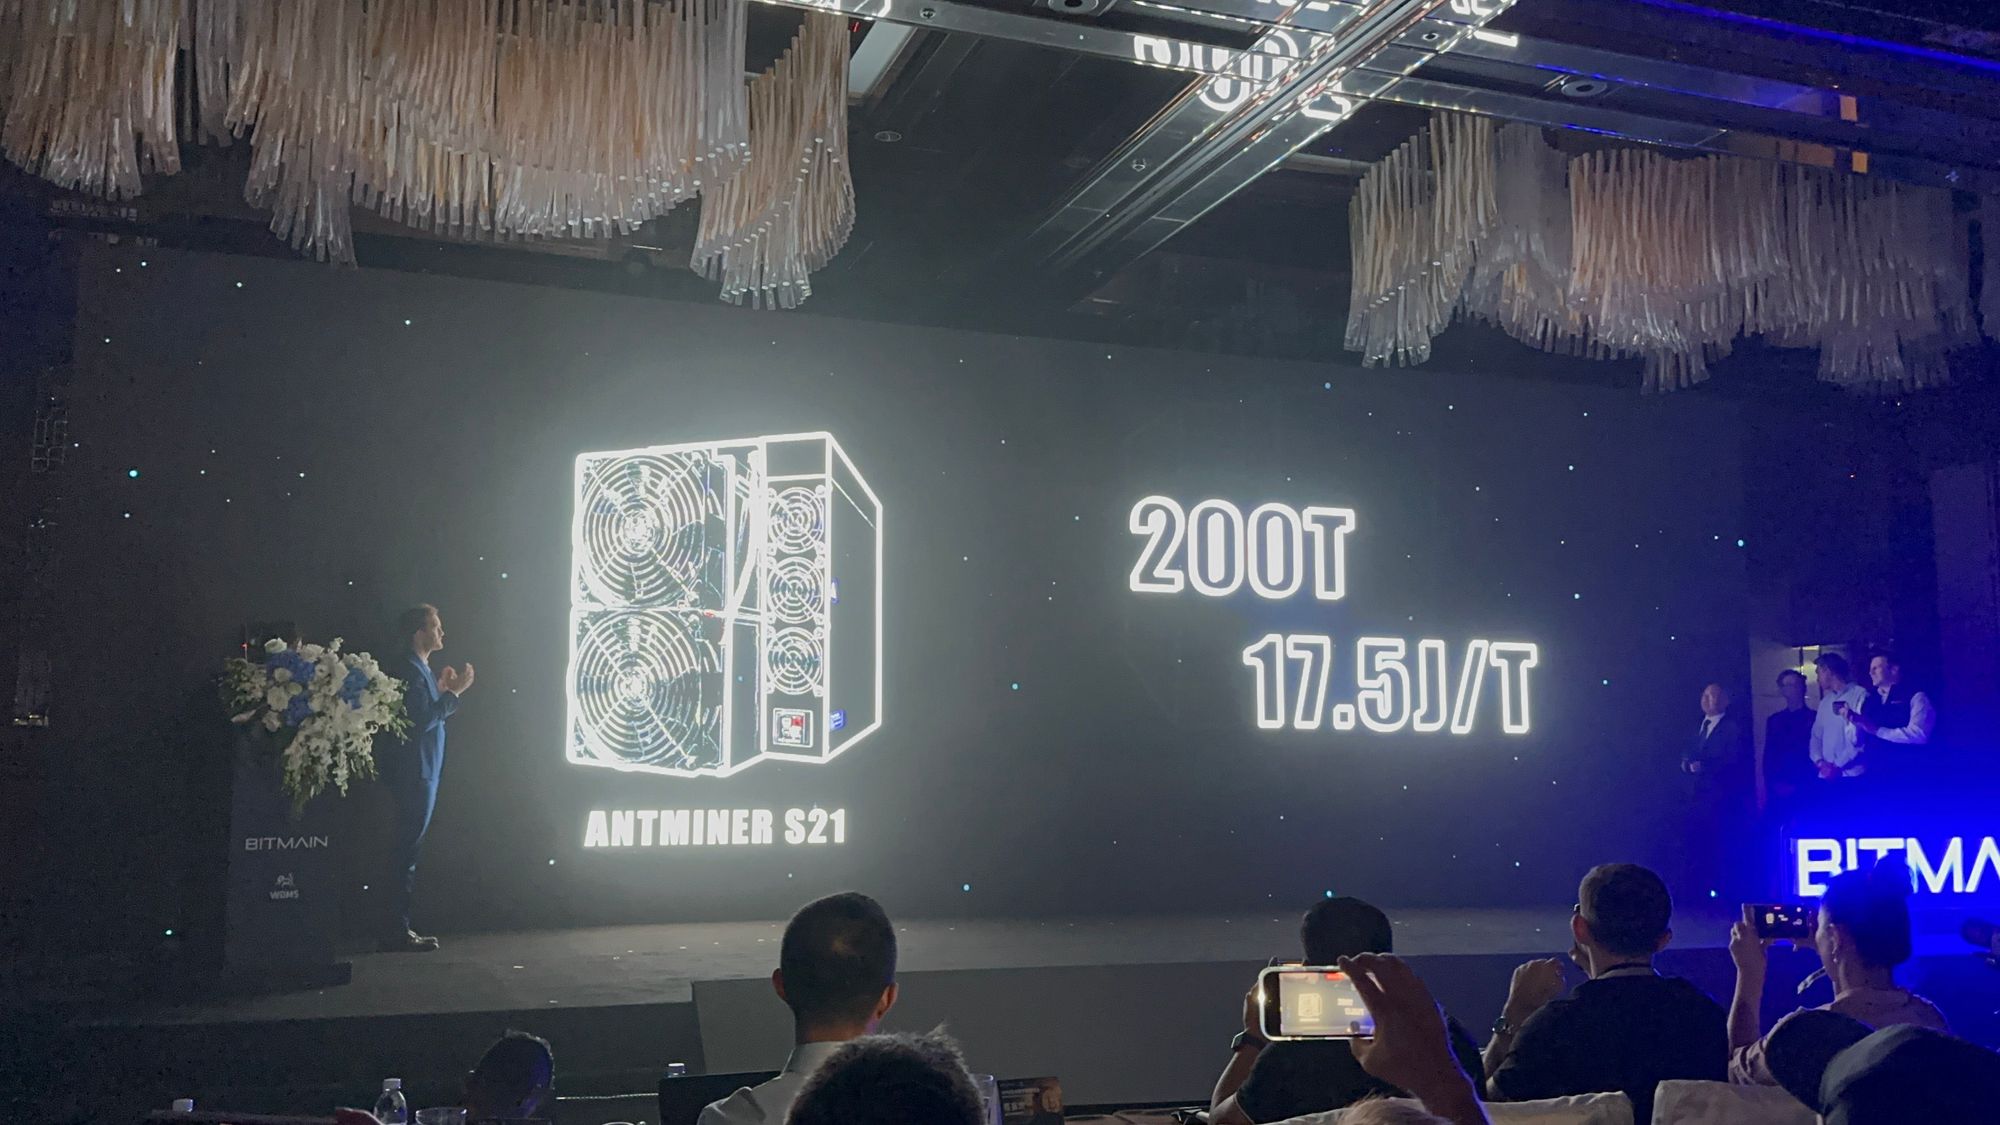 The Antminer S21 air cooled and S21 hydro cooled models were revealed at Bitmain's 2023 World Digital Mining Summit in Hong Kong